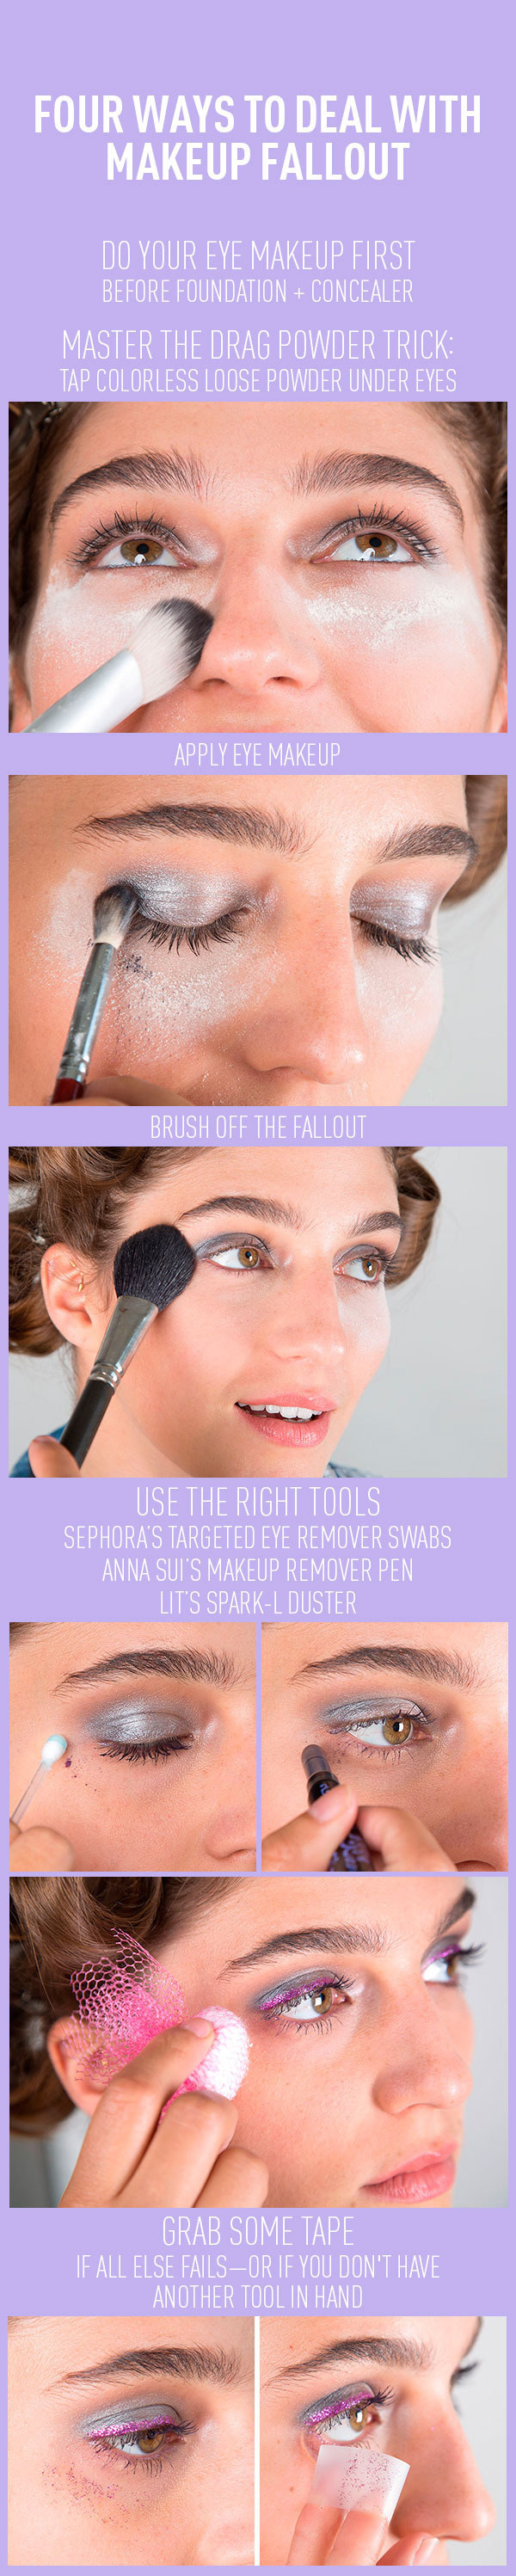 Makeup fallout is inevitable (especially with darker shadows), but there are definitely ways to fix it.